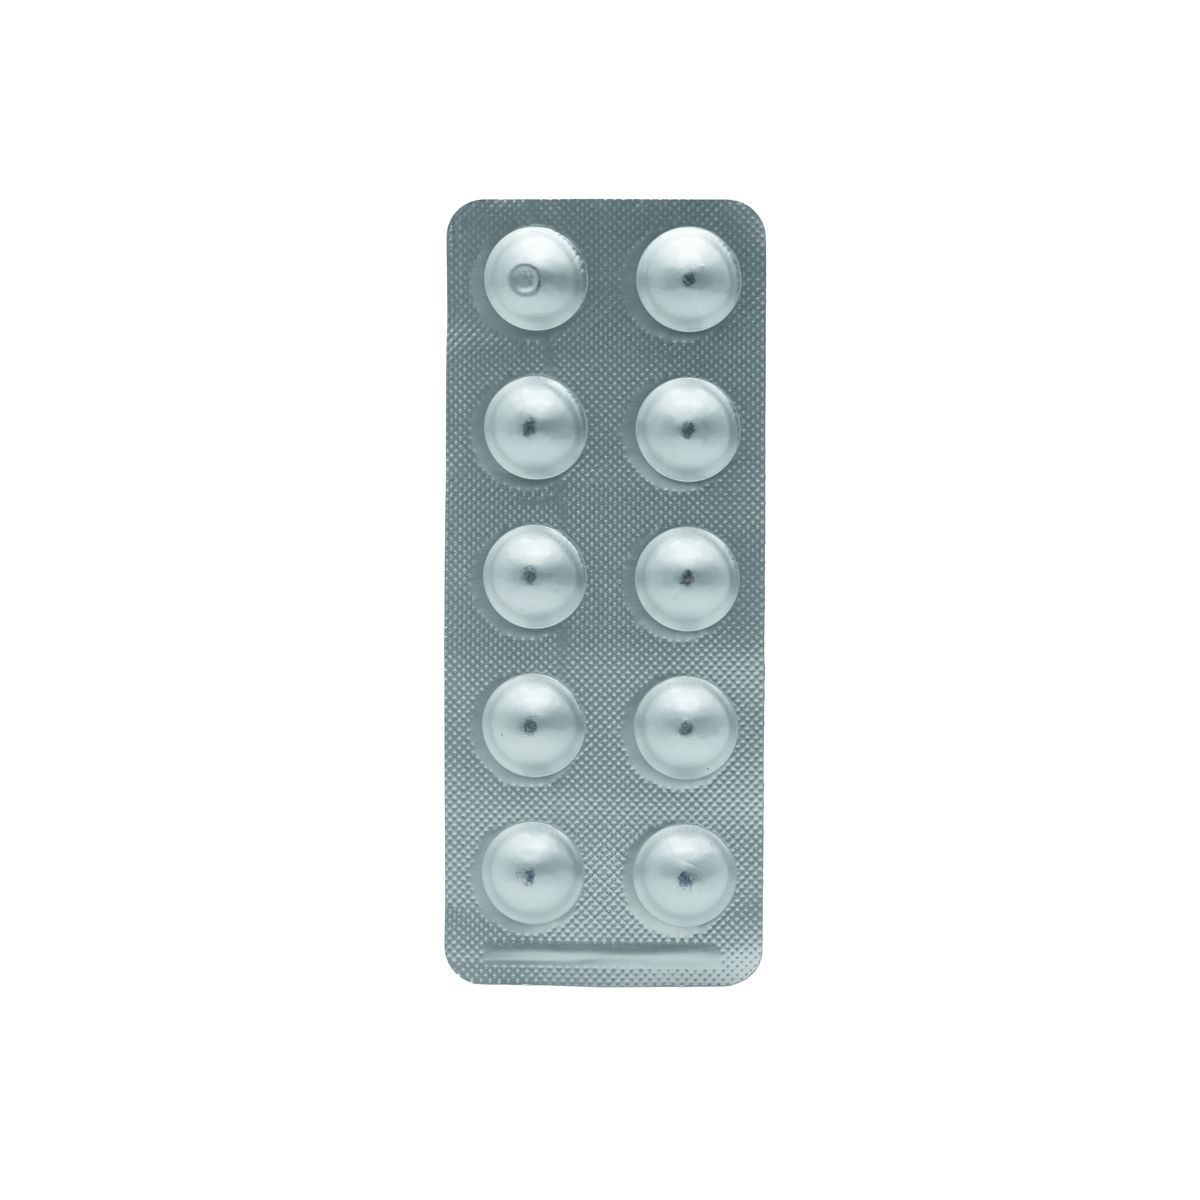 Dapaturn 5 Tablet 10's, Pack of 10 TABLETS